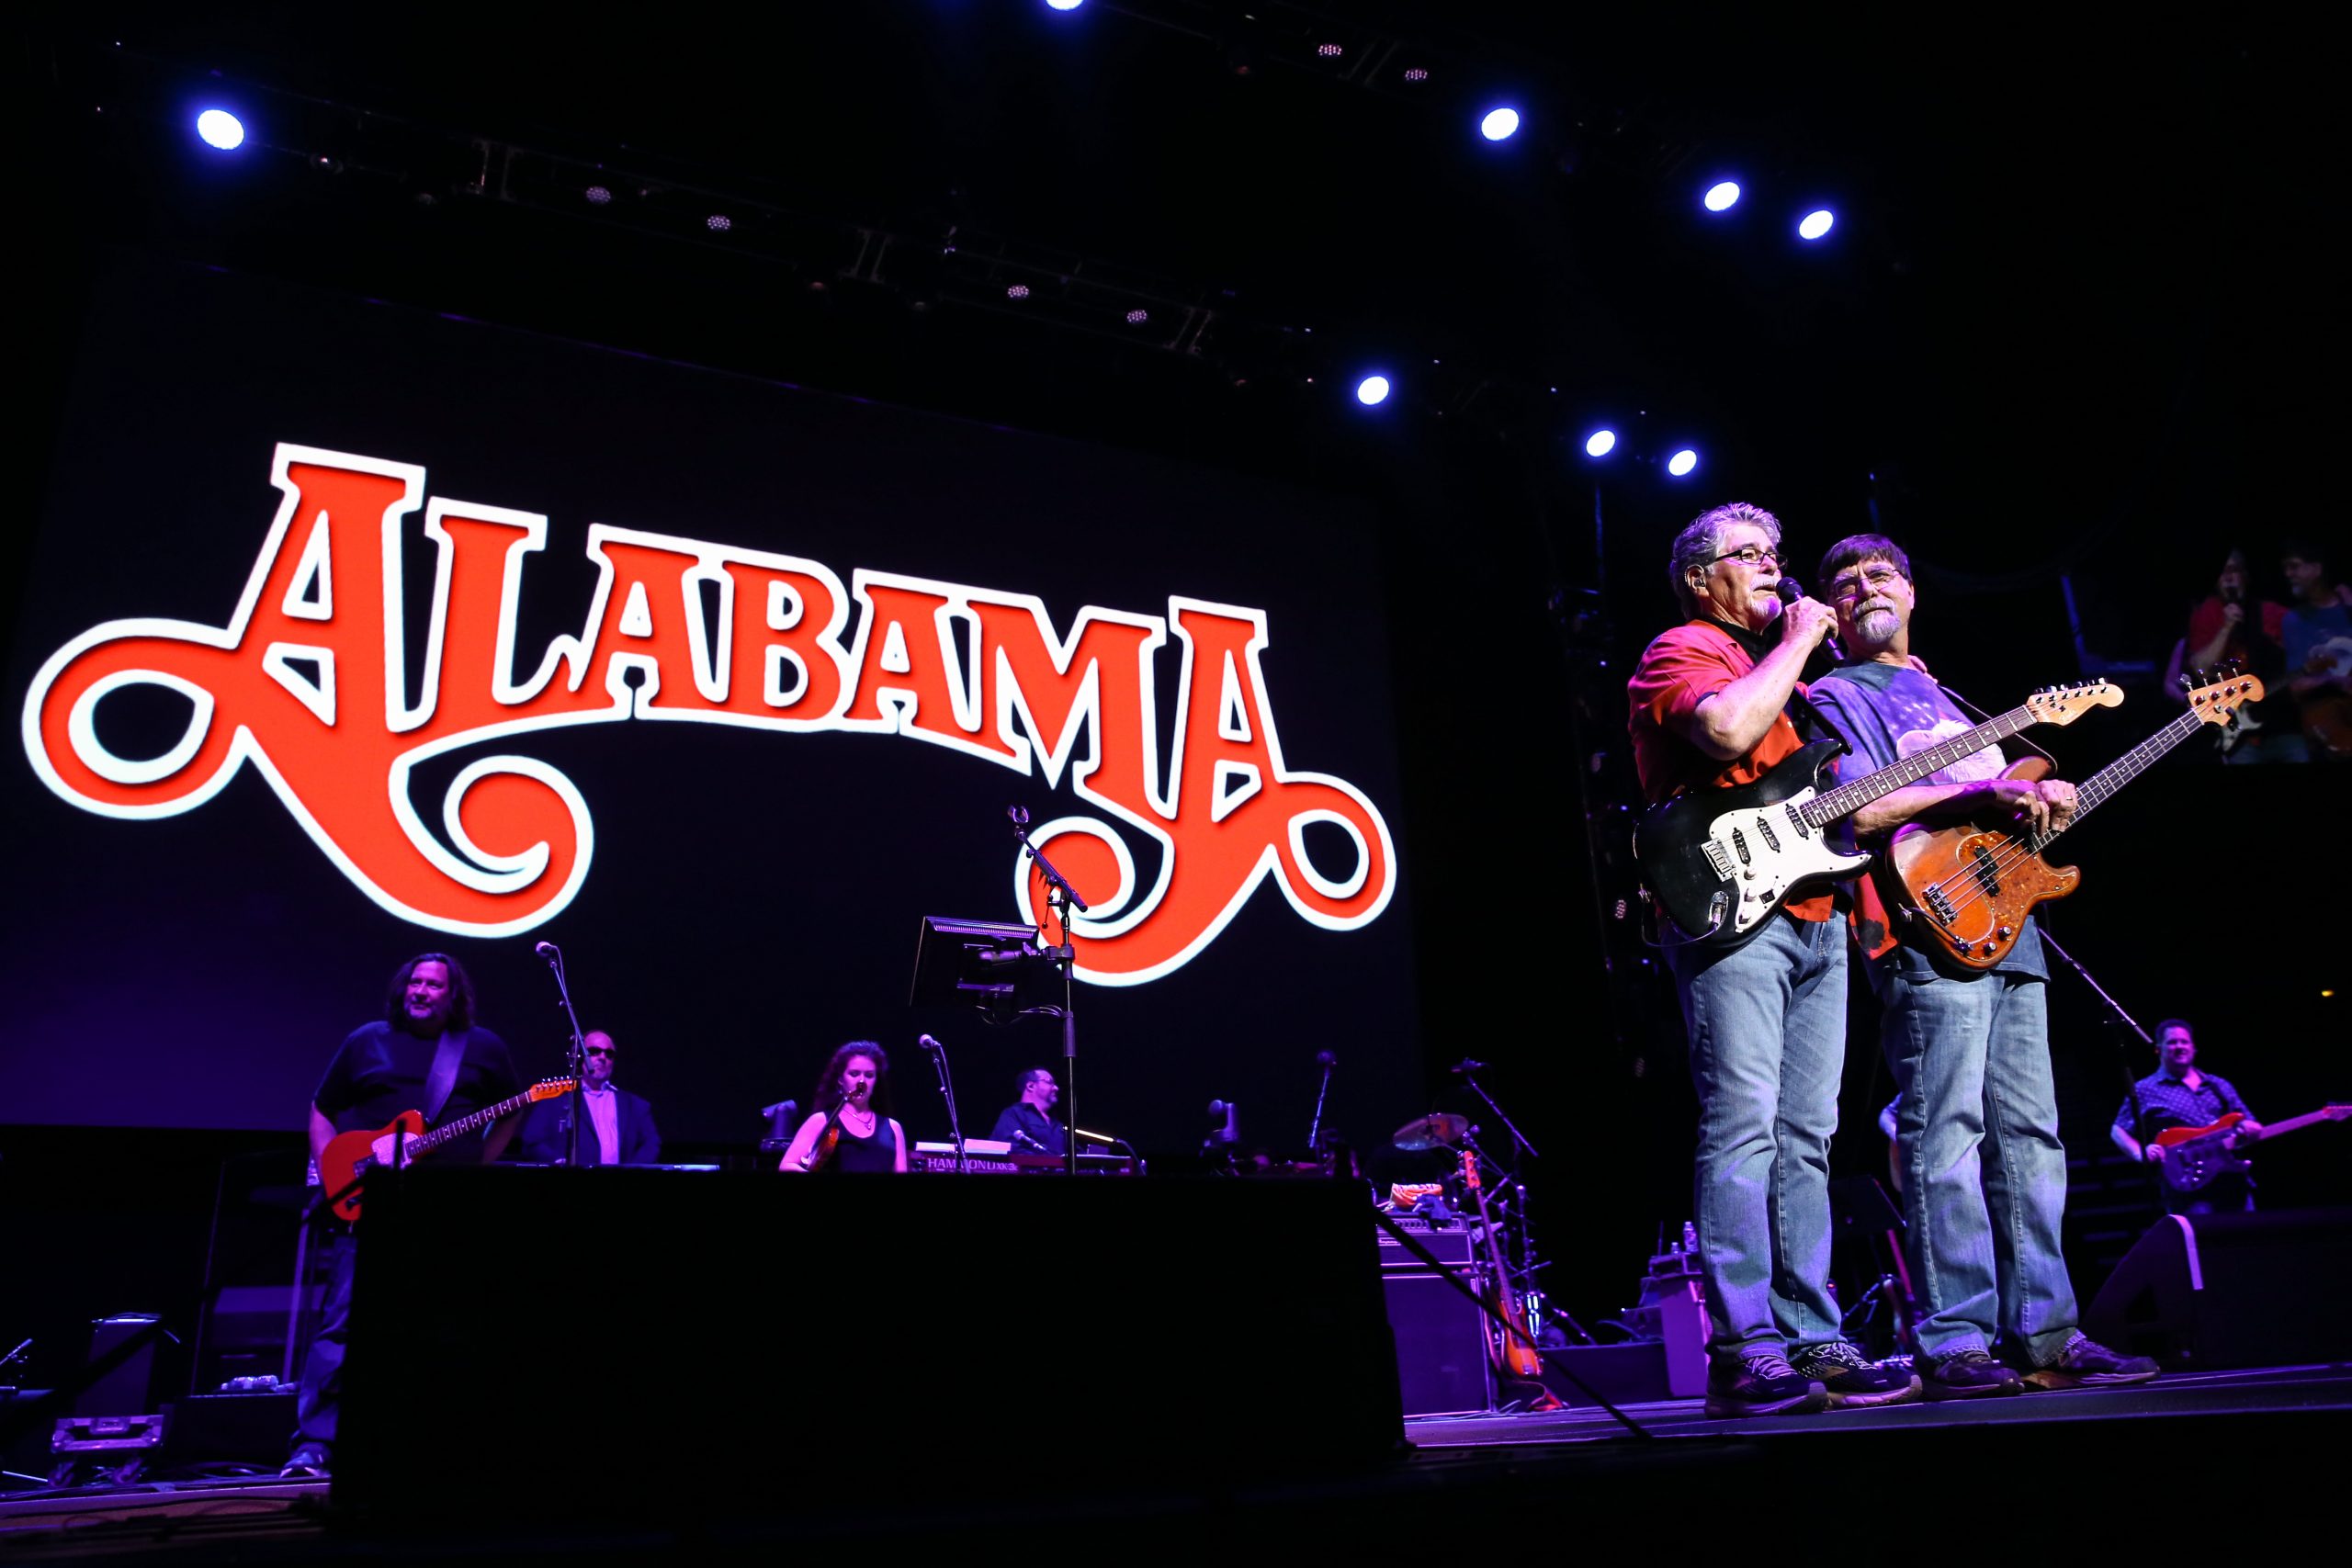 NASHVILLE, TENNESSEE - JULY 02: Randy Owen and Teddy Gentry of Alabama perform during the opening night of the Alabama 50th Anniversary Tour at Bridgestone Arena on July 02, 2021 in Nashville, Tennessee. (Photo by Terry Wyatt/Getty Images)